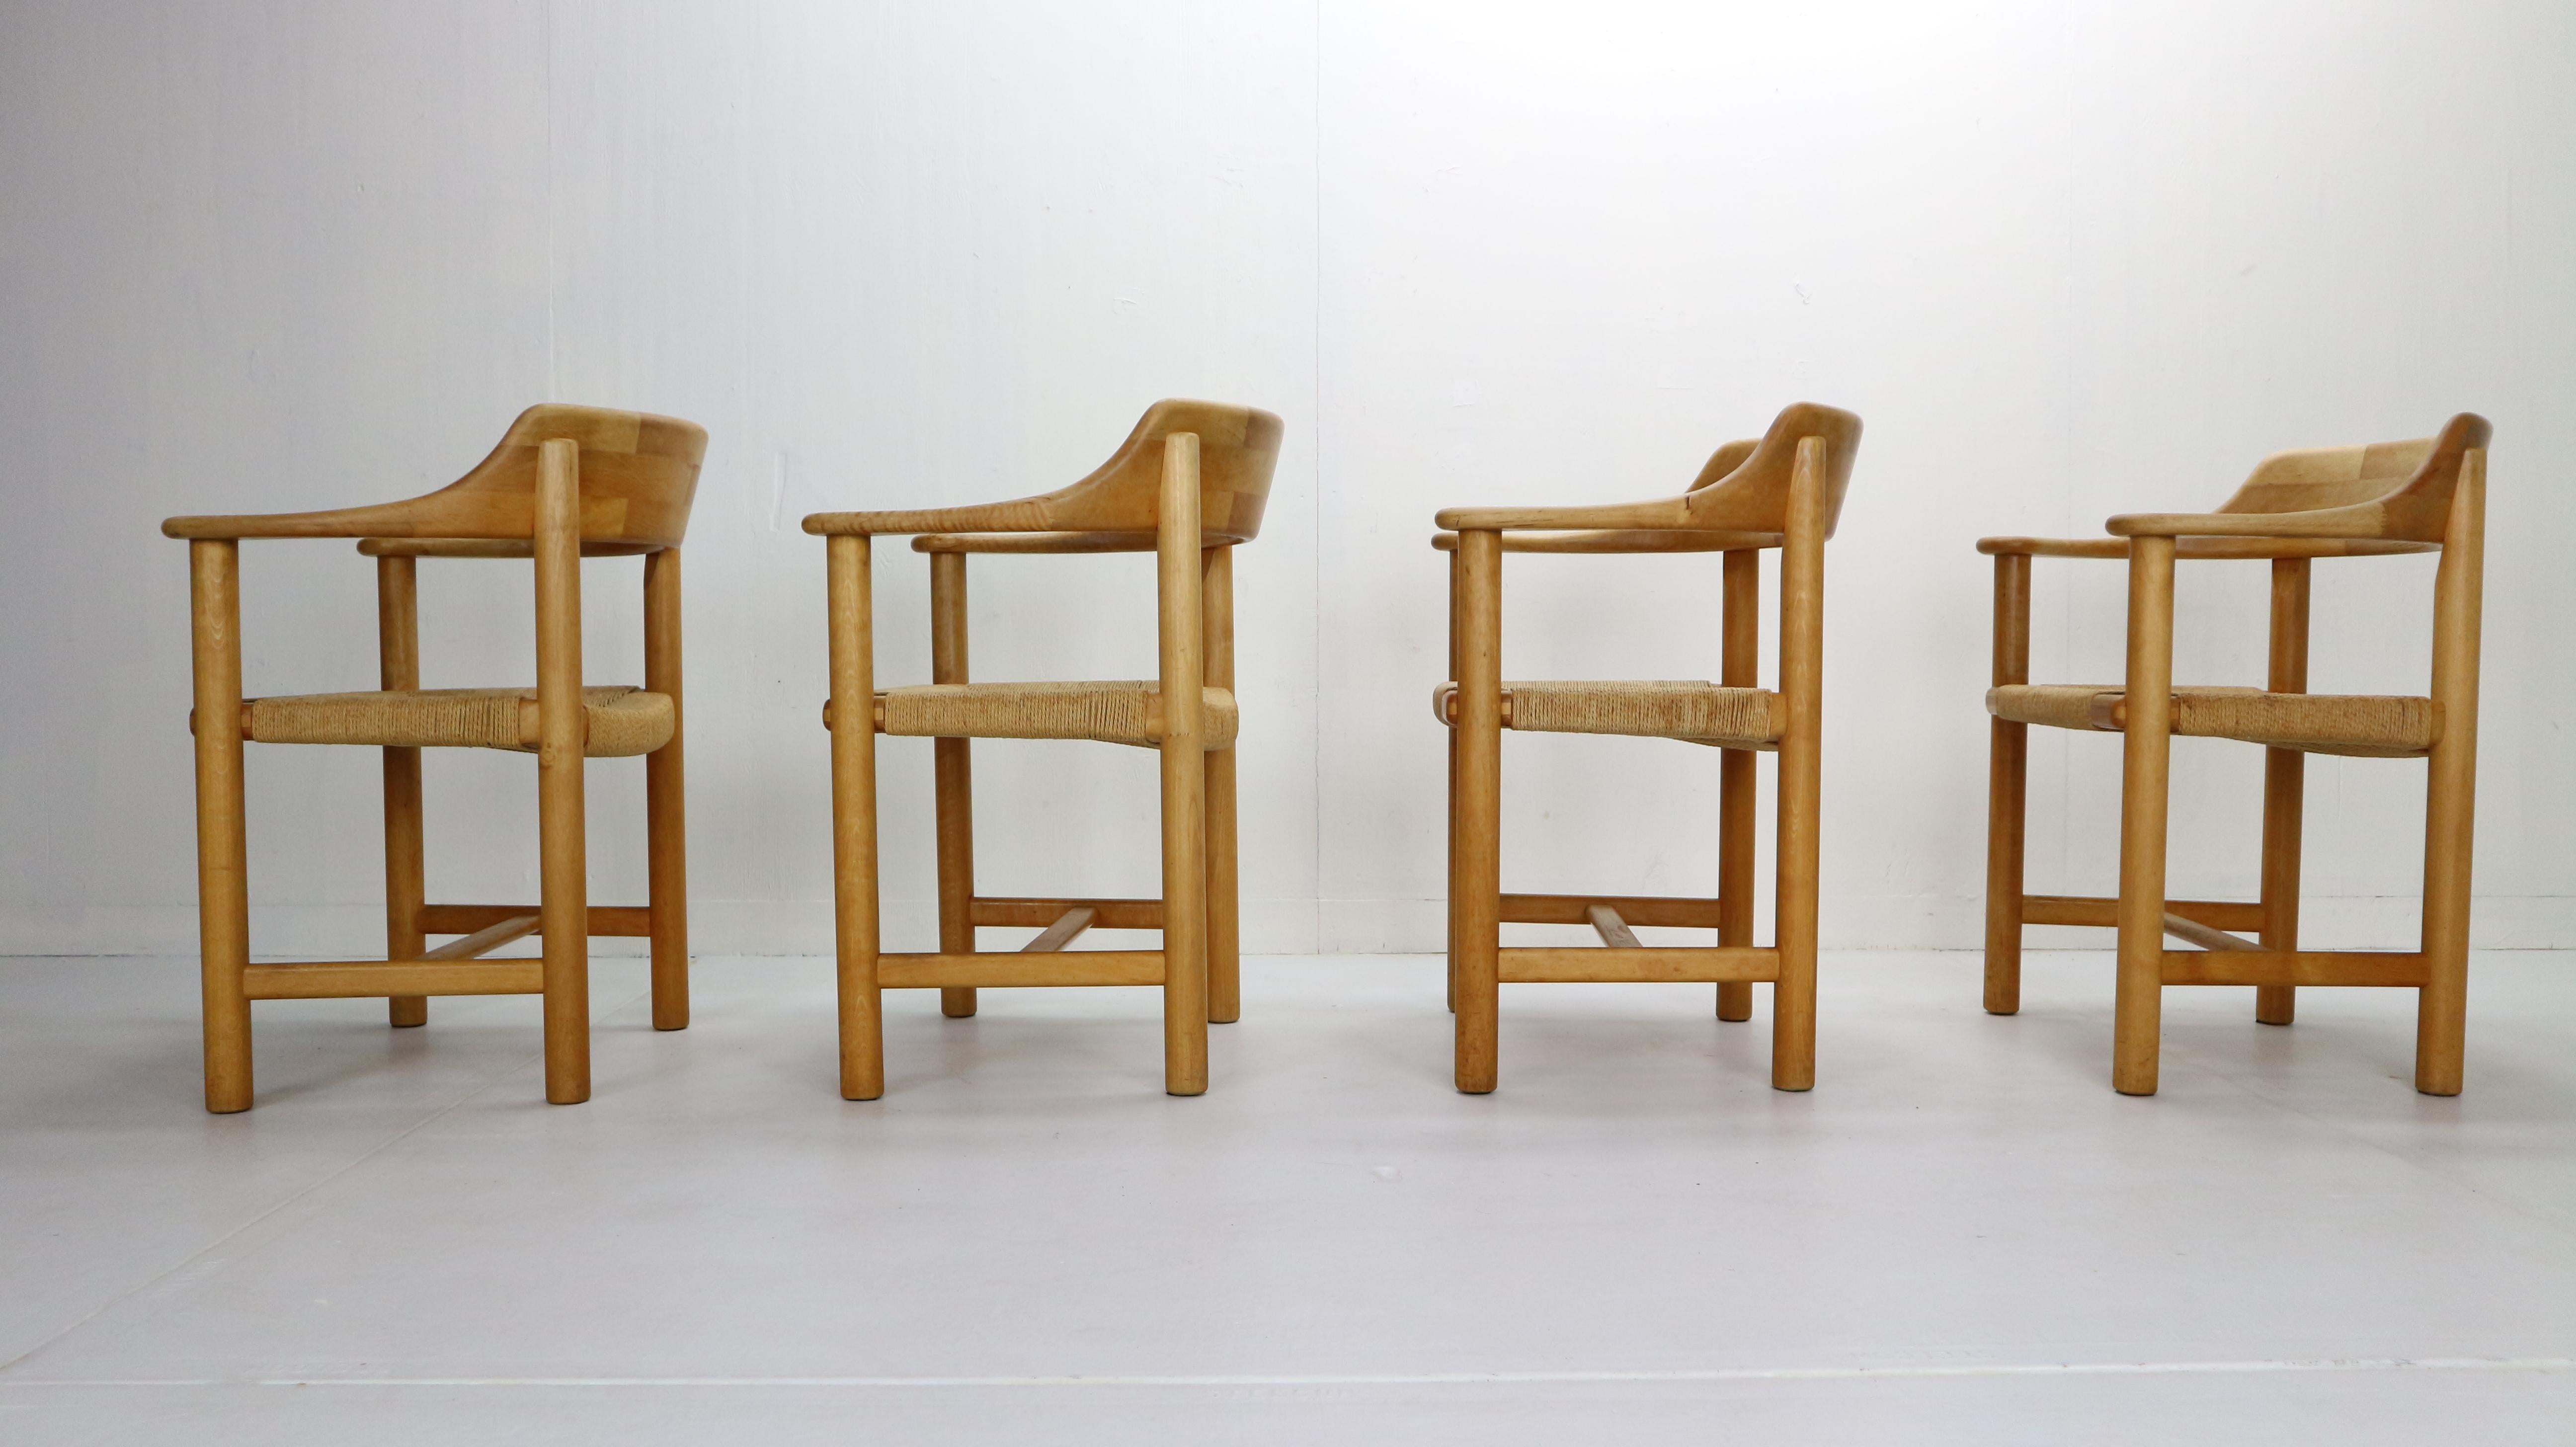 Woodwork Rainer Daumiller for Hirtshals Sawmill Set of 4 Dining Room Chairs, Denmark 1970